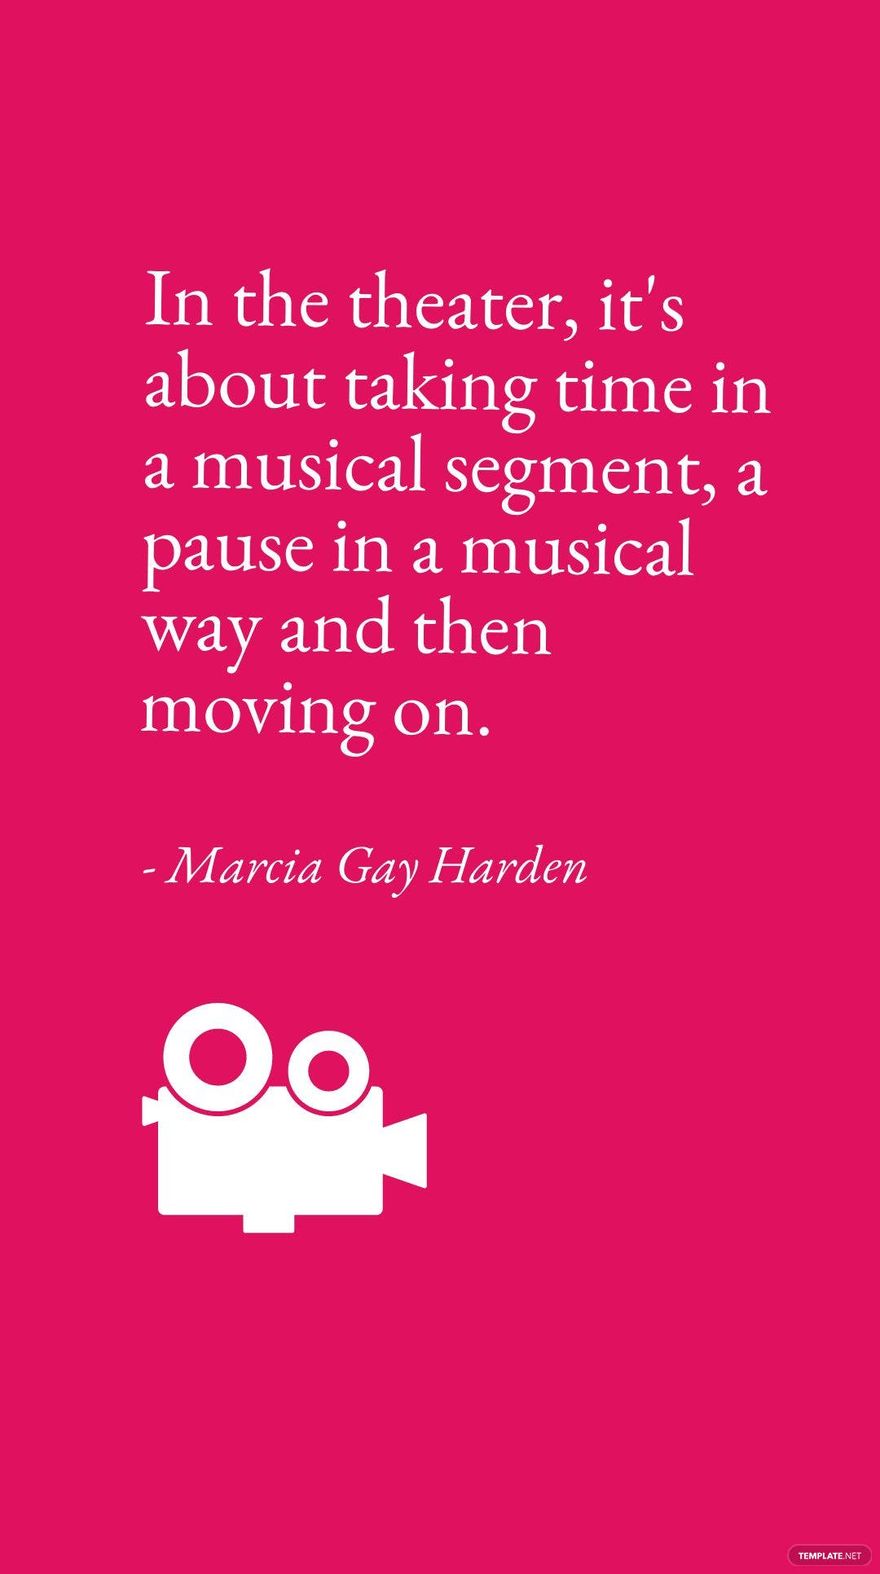 Marcia Gay Harden -In the theater, it's about taking time in a musical segment, a pause in a musical way and then moving on.